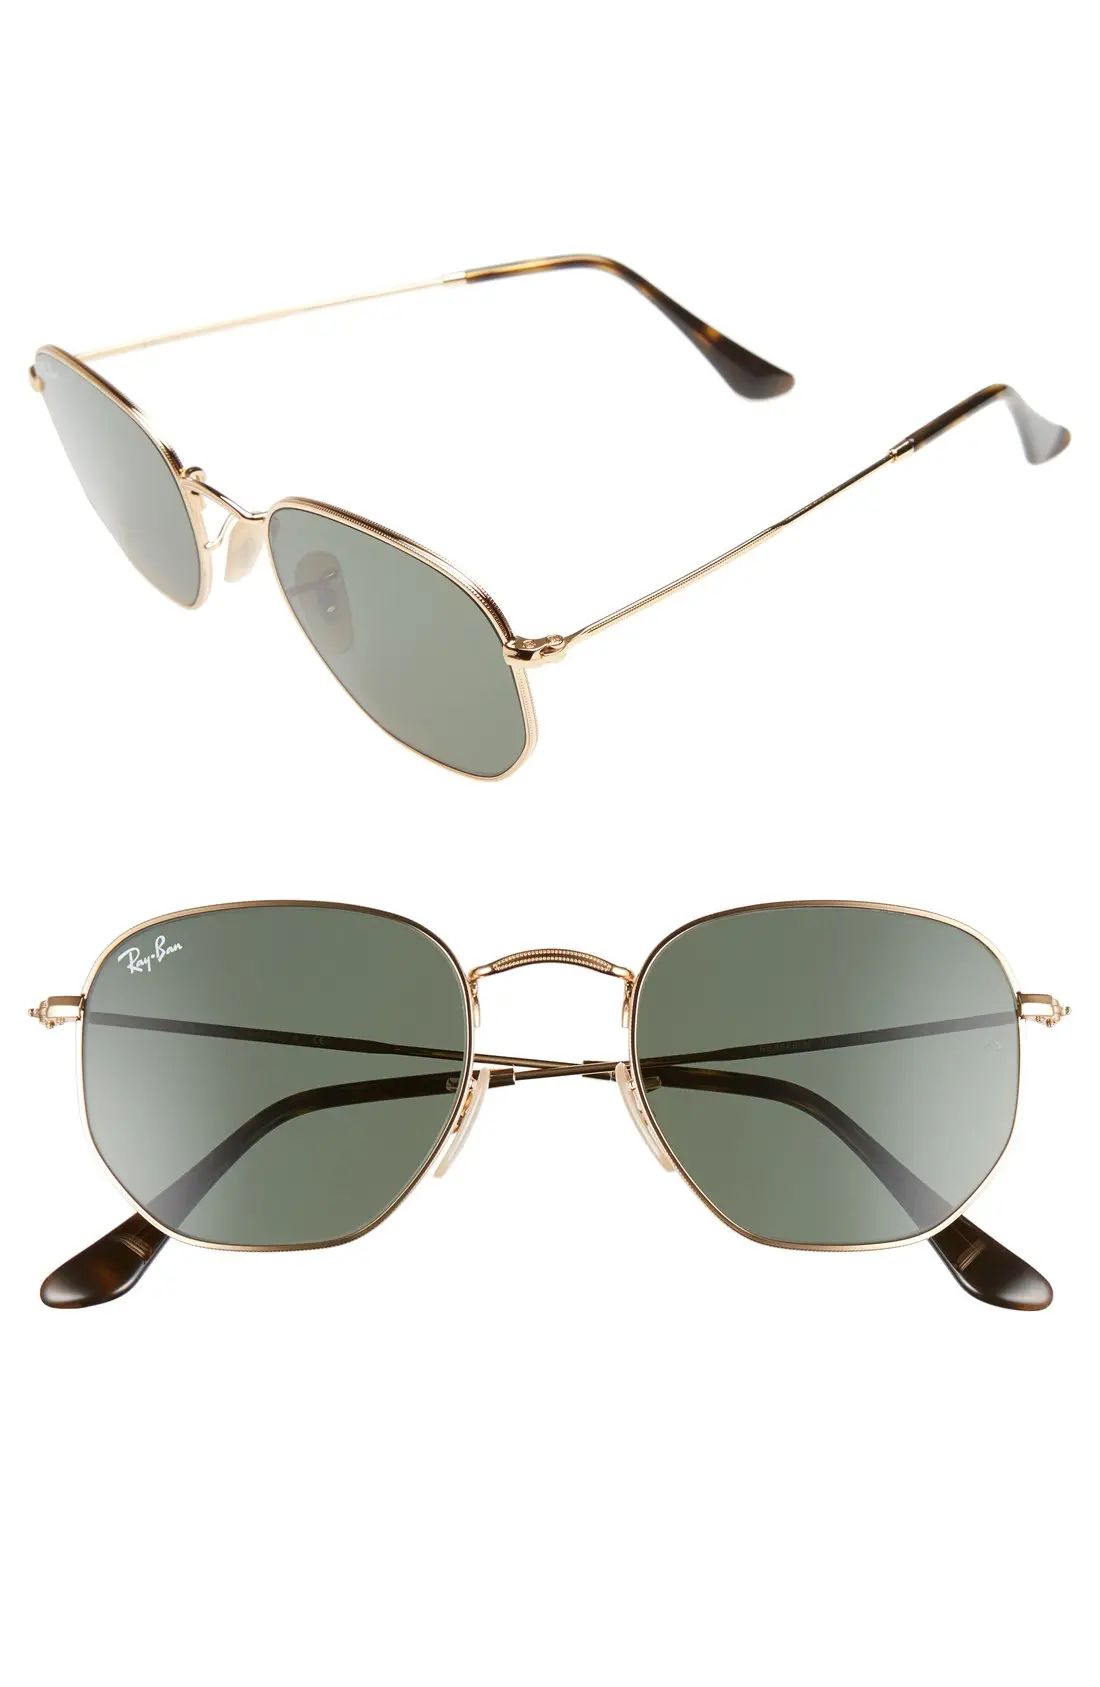 Ray-Ban 51mm Hexagonal Flat Lens Sunglasses in Metal Gold/Green at Nordstrom | Nordstrom